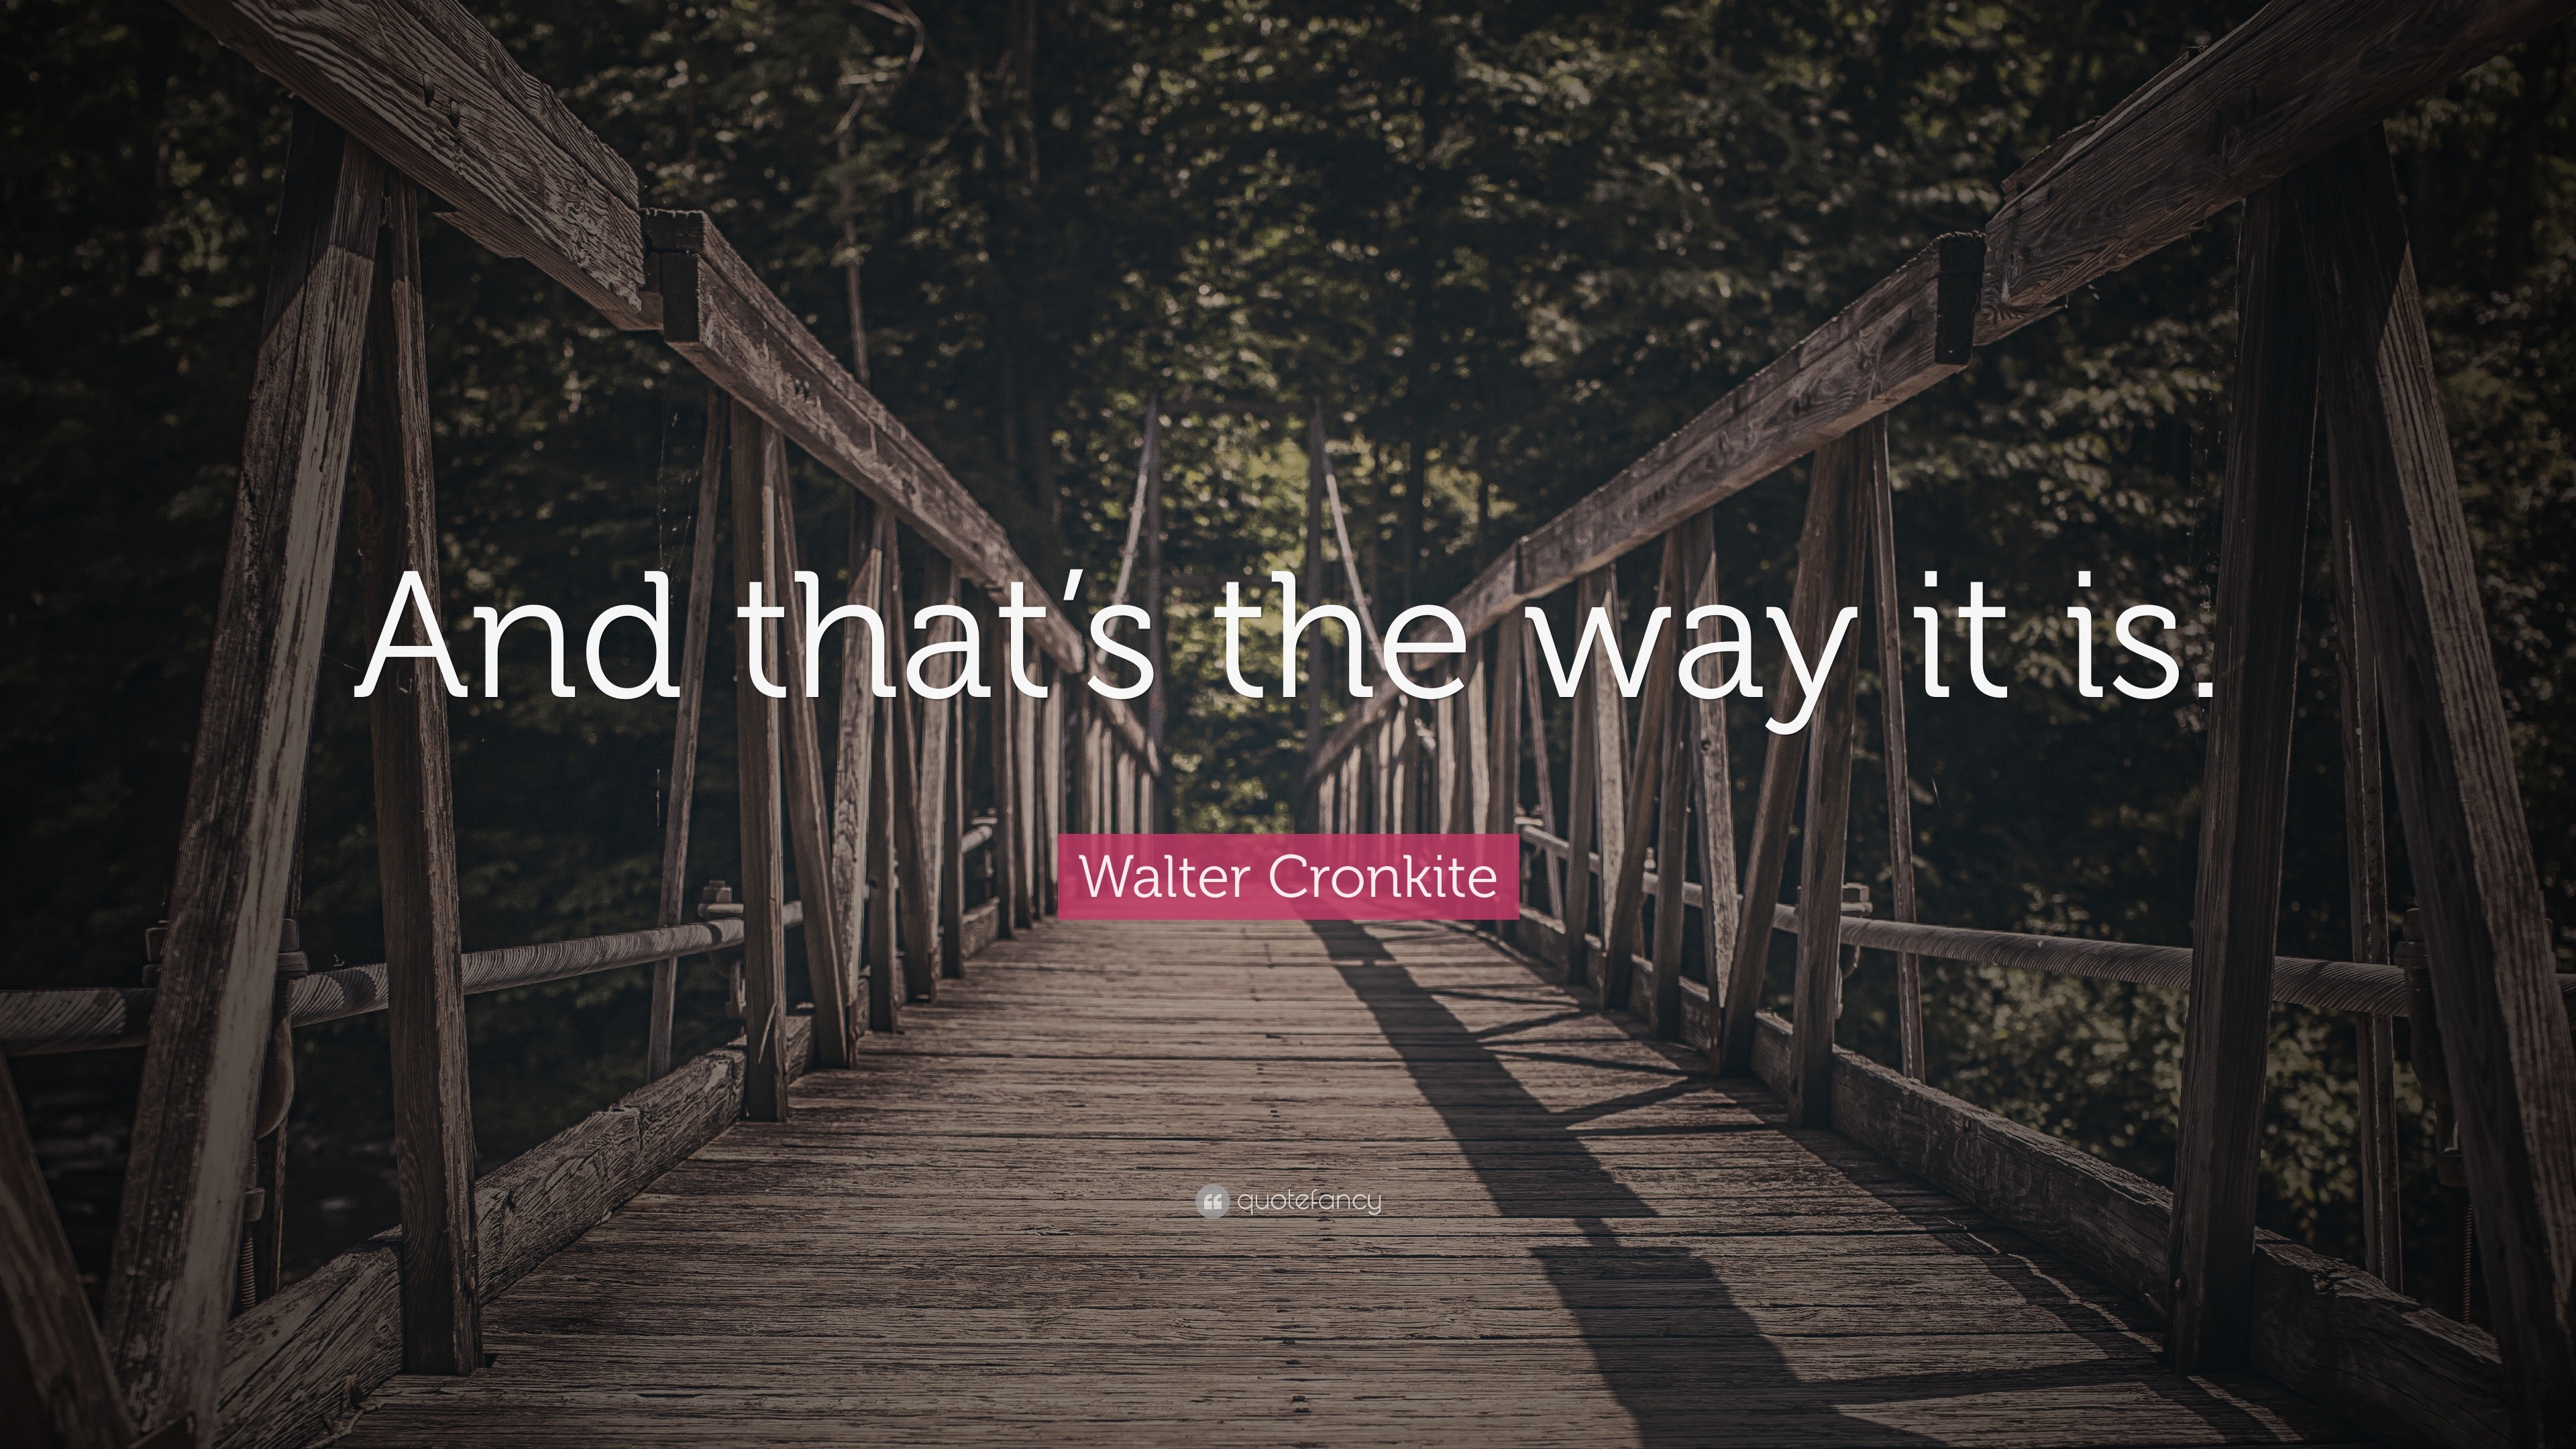 Walter Cronkite Quote: “And that's the way it is.”